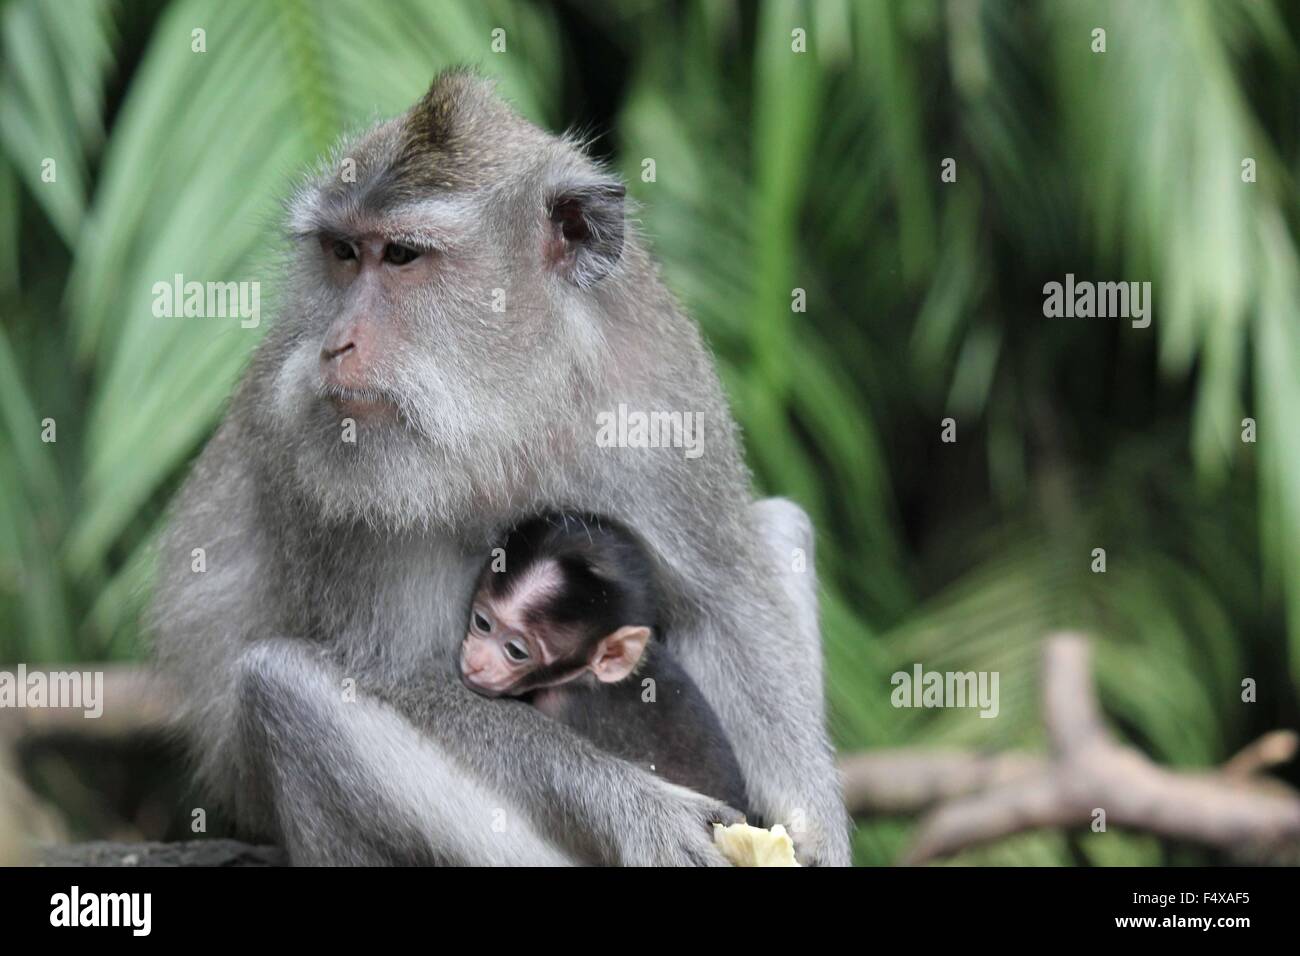 Baby monkey with its mother in the Monkey Forest in Ubud, Indonesia Stock Photo